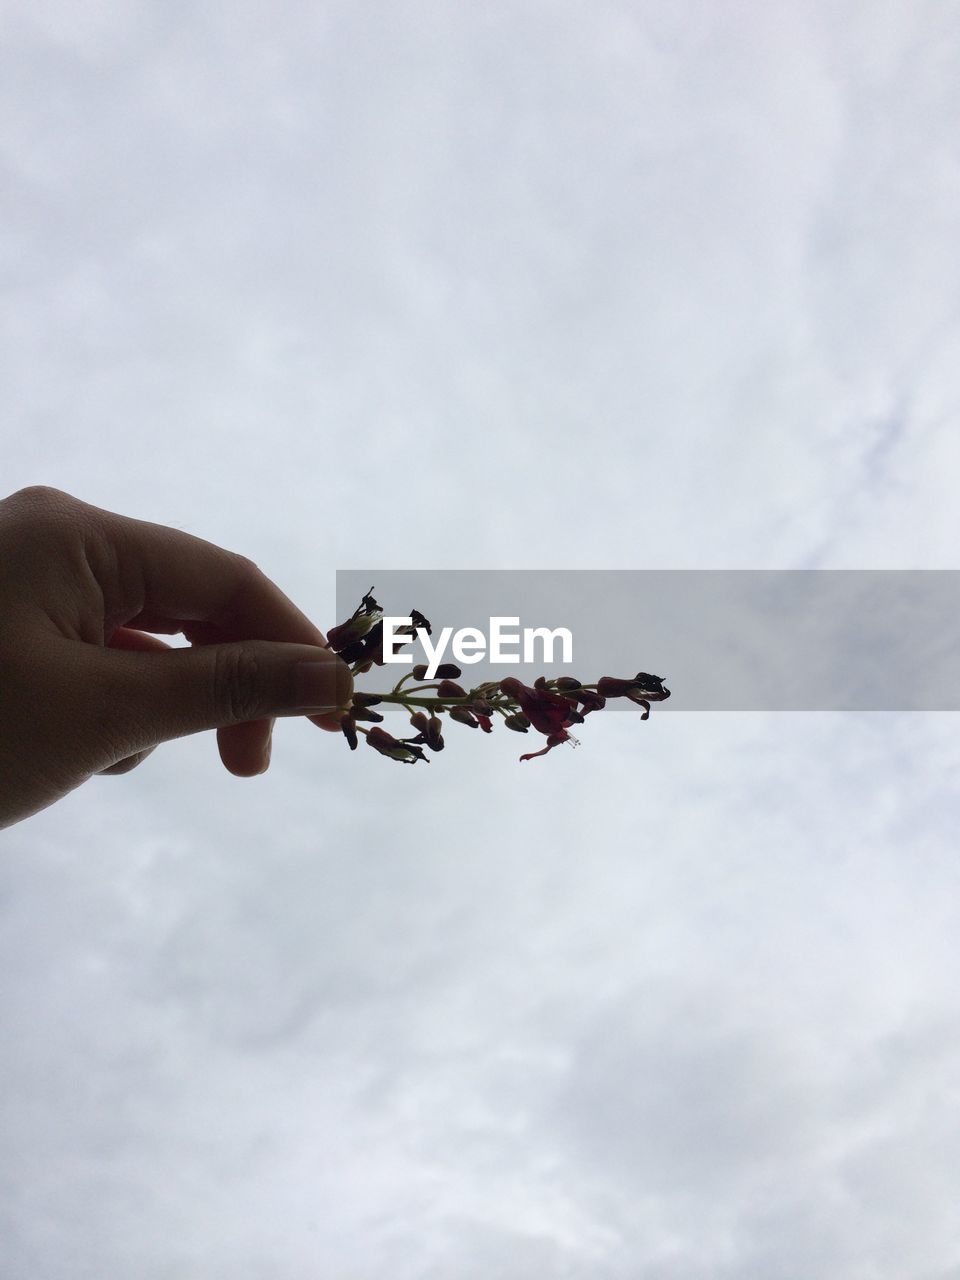 LOW ANGLE VIEW OF PERSON HAND AGAINST WHITE FLOWERING PLANT AGAINST SKY